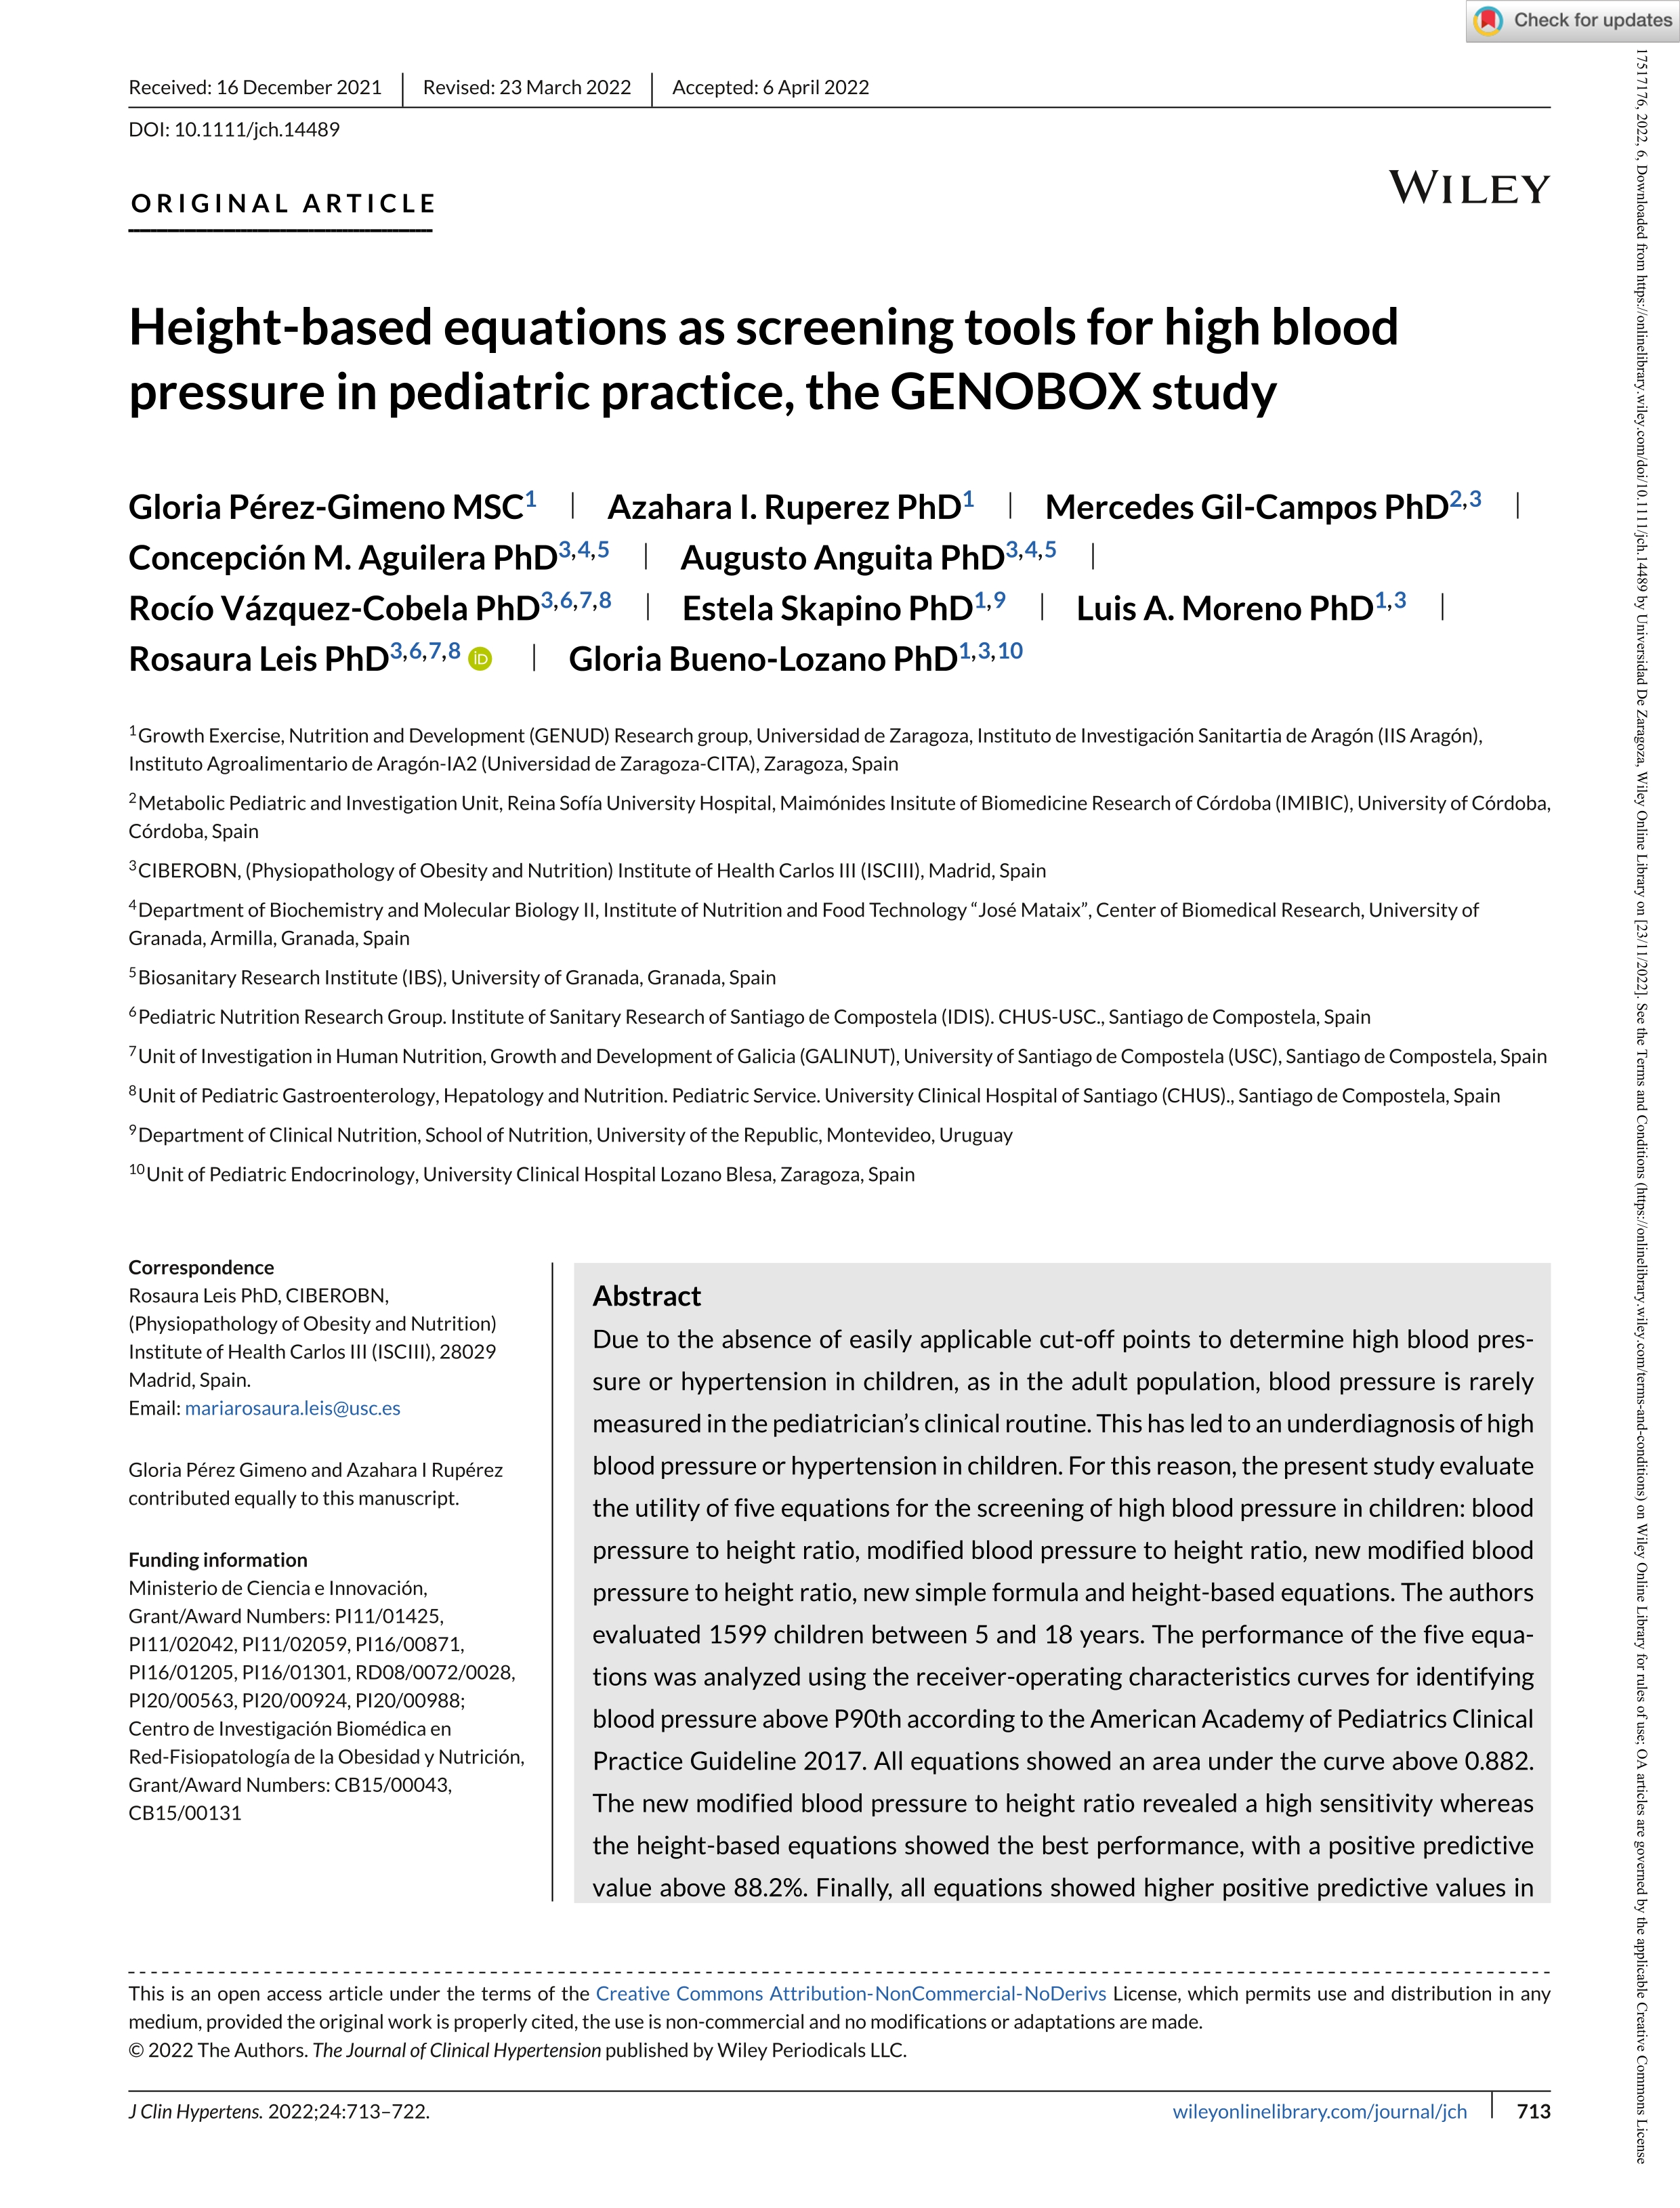 Height-based equations as screening tools for high blood pressure in pediatric practice, the GENOBOX study